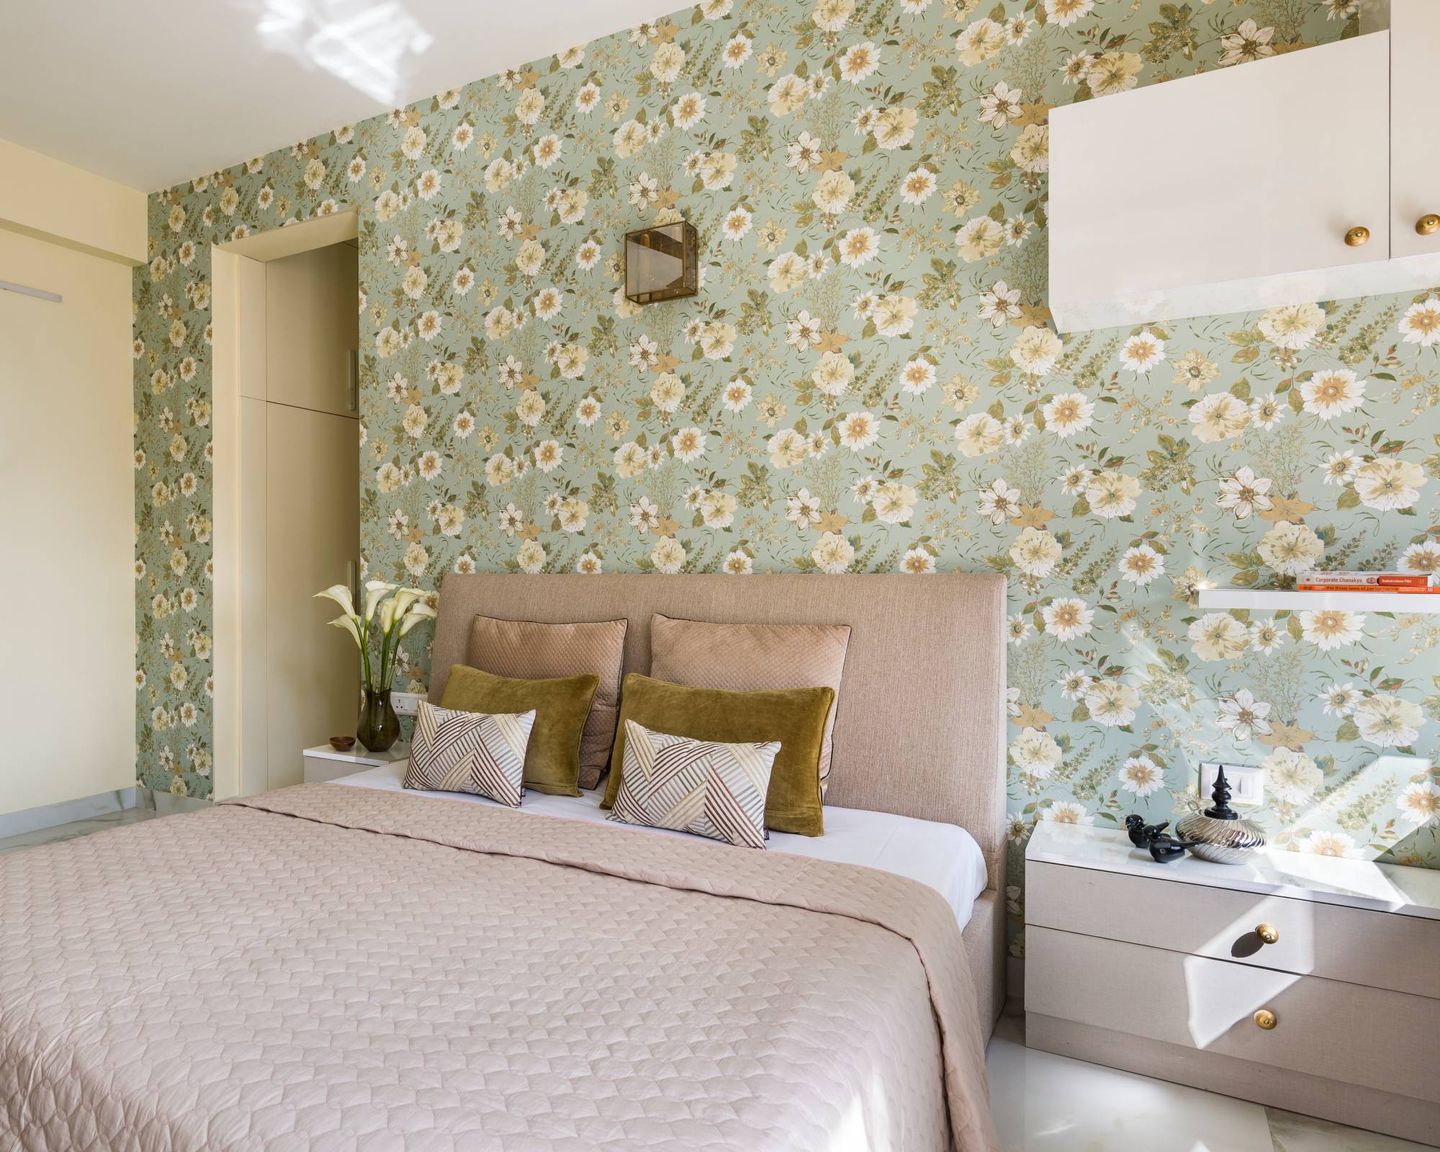 Green And Yellow Bedroom Wallpaper Design With A Floral Pattern - Livspace